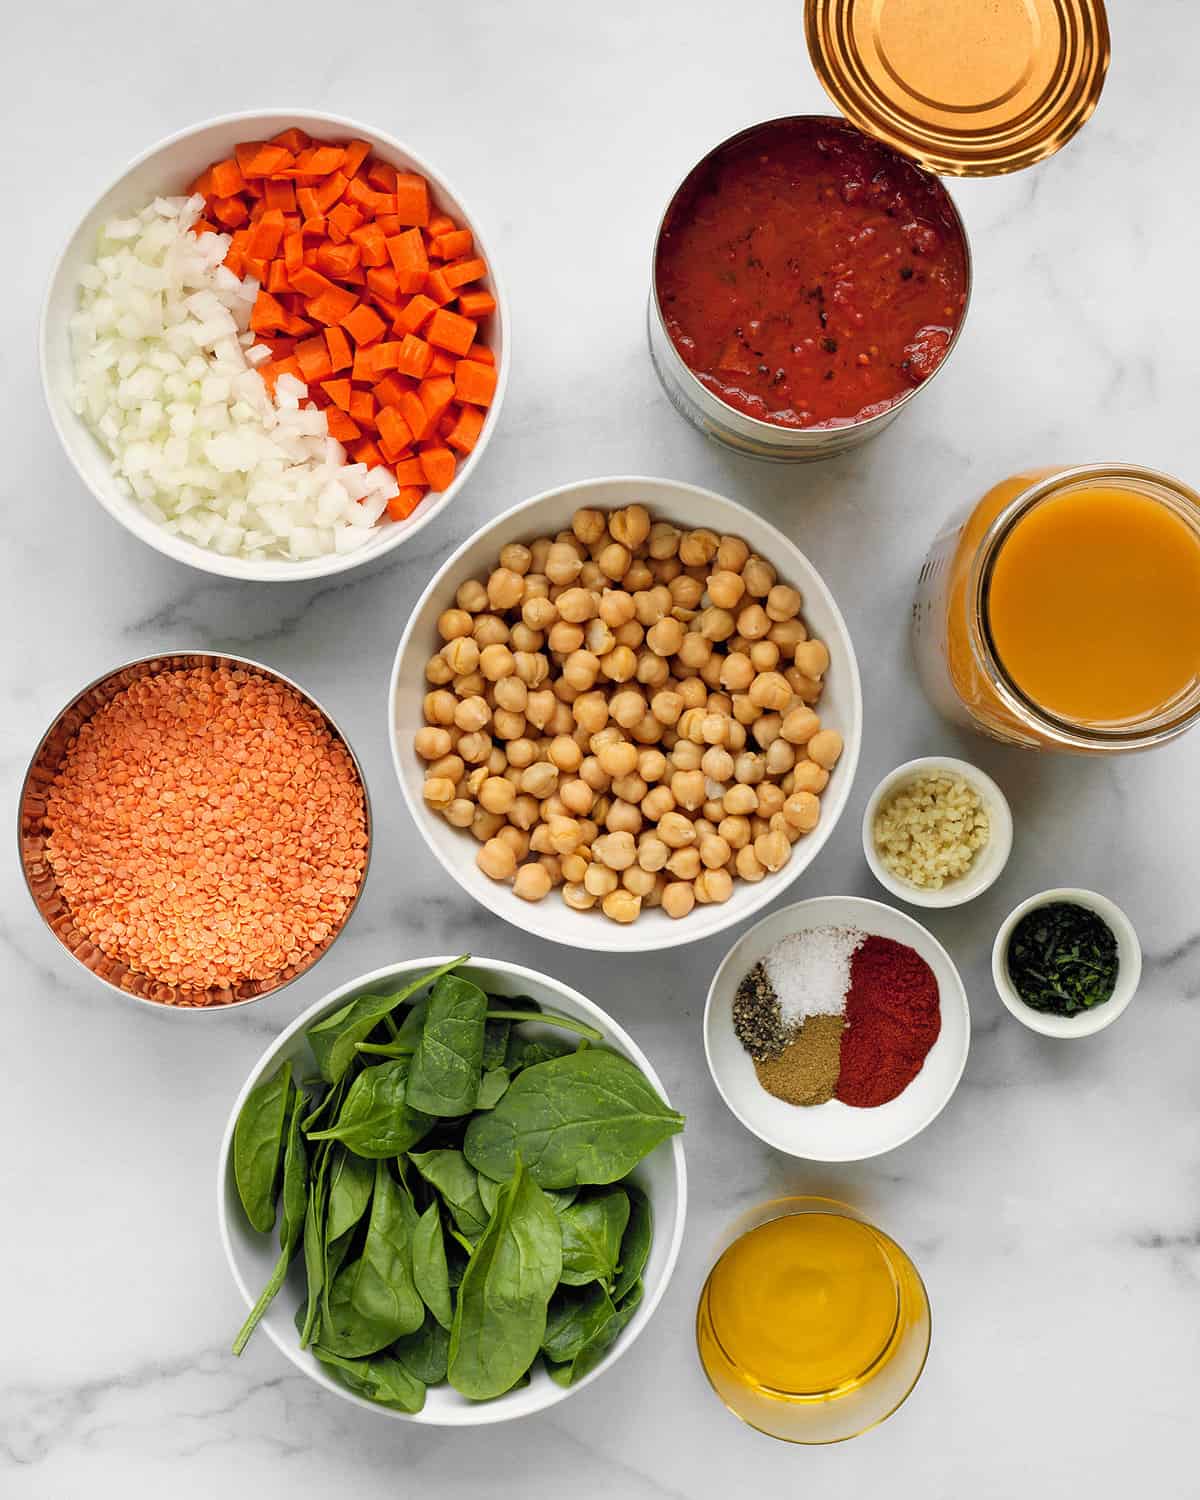 Ingredients including lentils, carrots, spinach, onions, olive oil, garlic and spices.